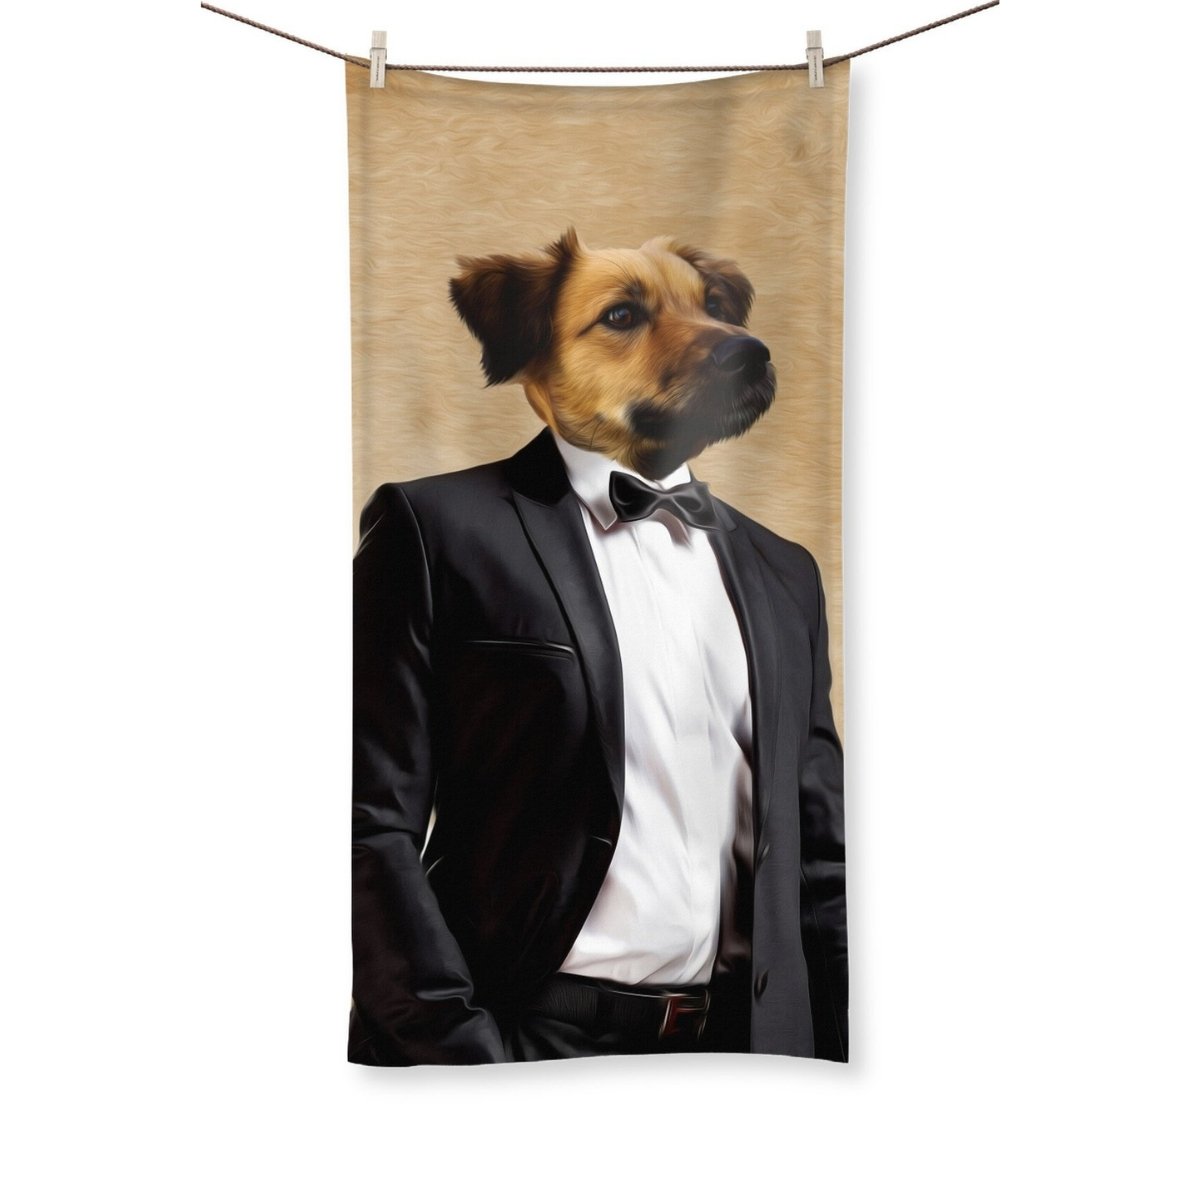 The Gentleman: Custom Pet Towel - Paw & Glory - #pet portraits# - #dog portraits# - #pet portraits uk#Paw & Glory, pawandglory, cat picture painting, the admiral dog portrait, pet portraits usa, willow dog portraits, the general portrait, dog drawing from photo, pet portrait,pet art Towel